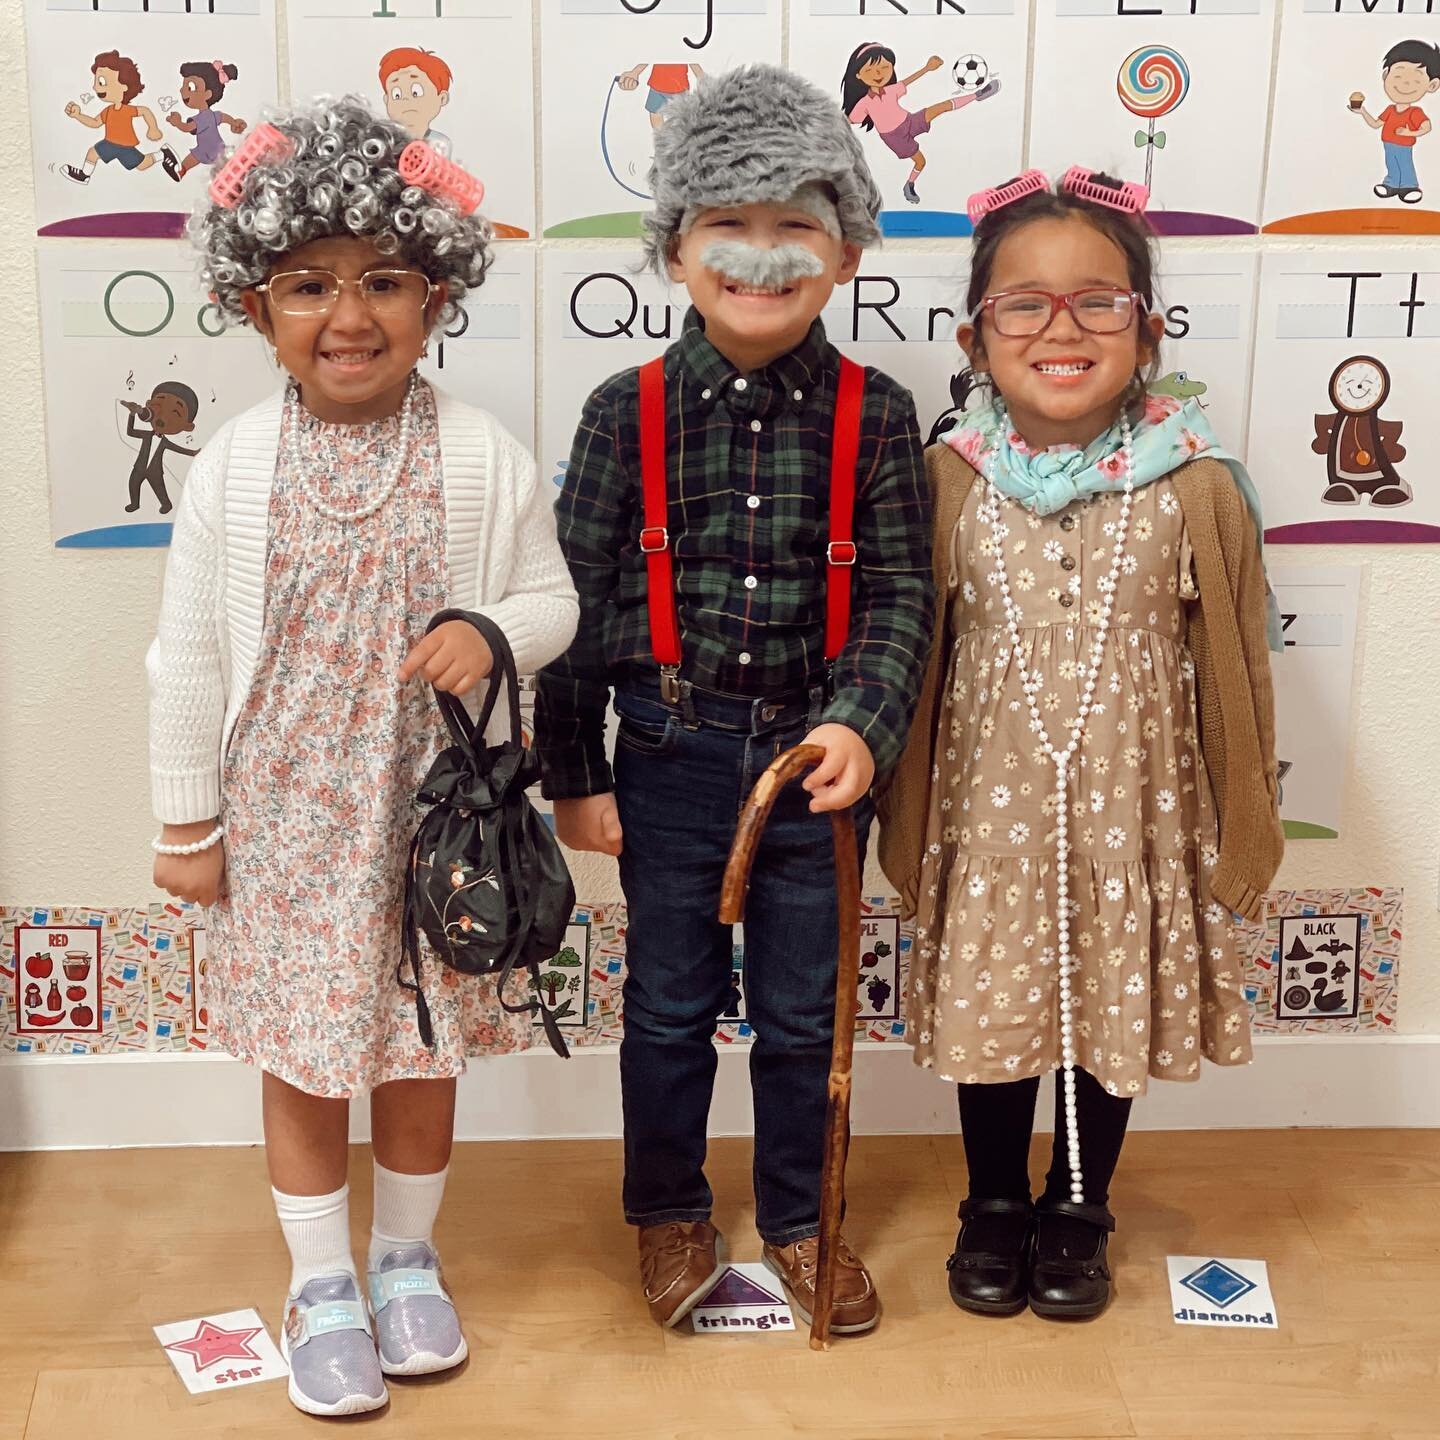 Our brilliant scholars celebrated being 100 days smarter yesterday!! We are so proud of their hard work and determination! 🤩